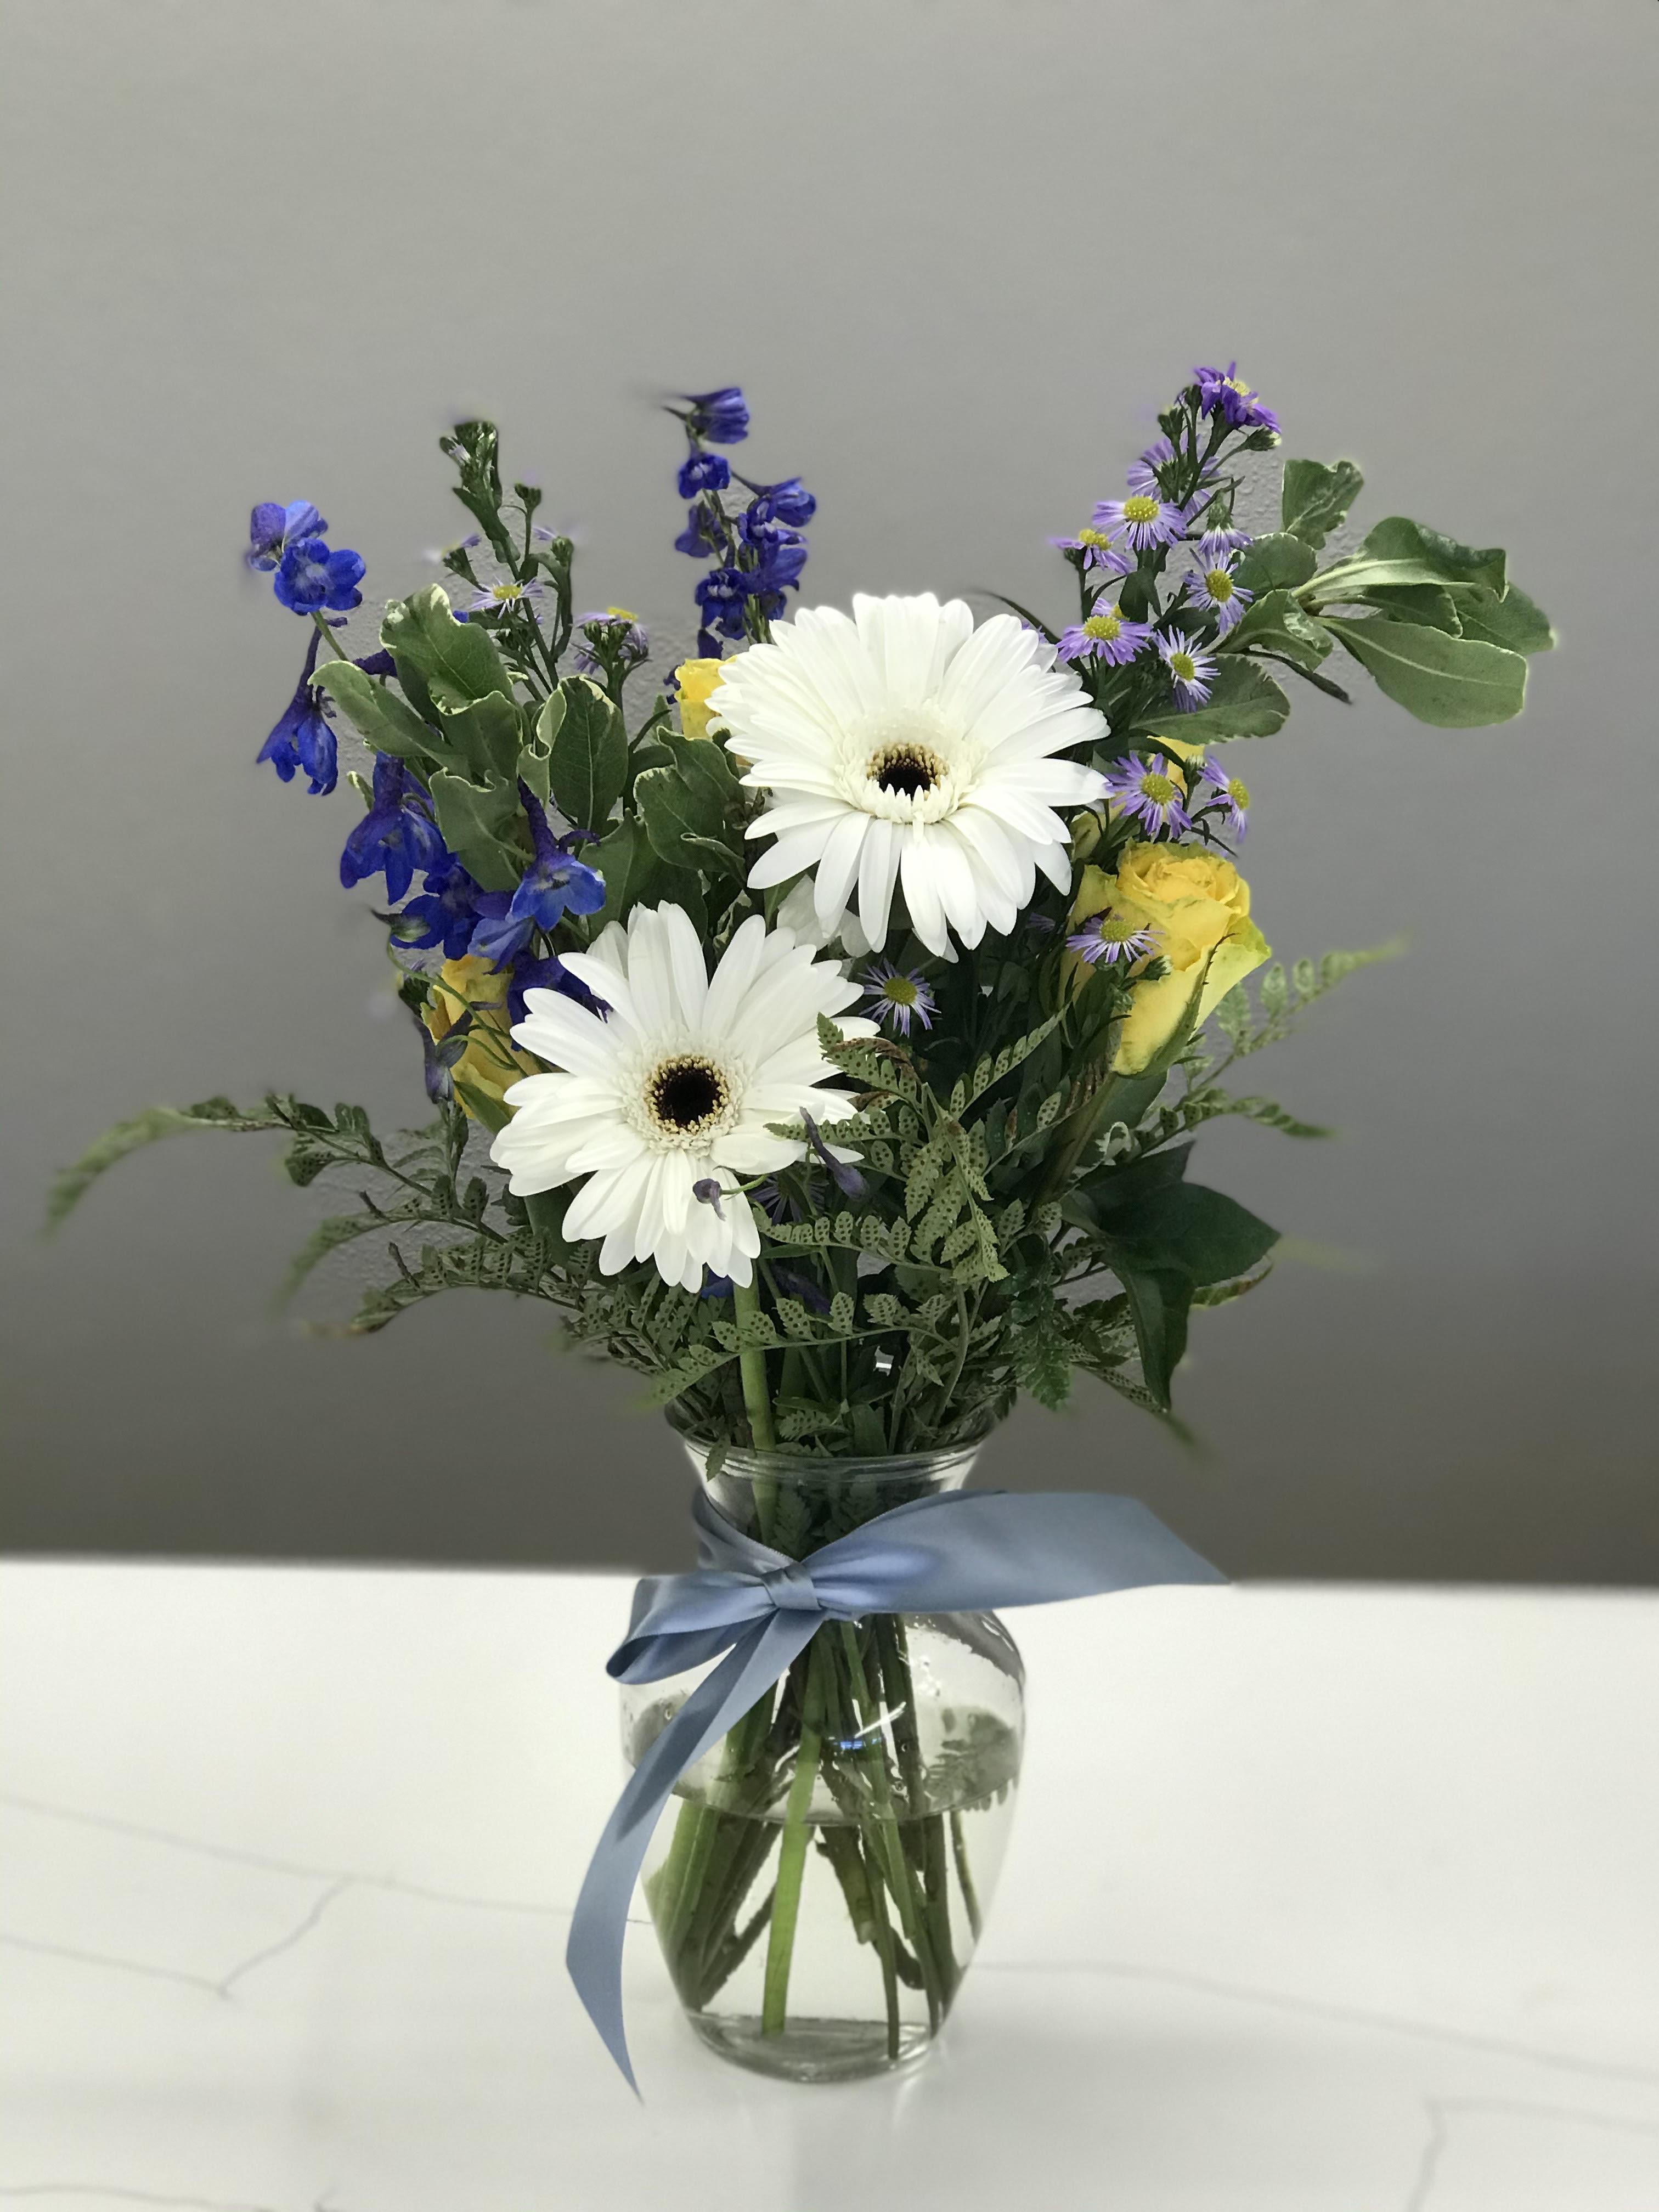 Double Scoop - Two dollops of Gerbera daisy nestled in yellow roses and blue delphinium for a tendered hearted hello. Perfect for a celebration of life, birthdays, or healing thoughts. 